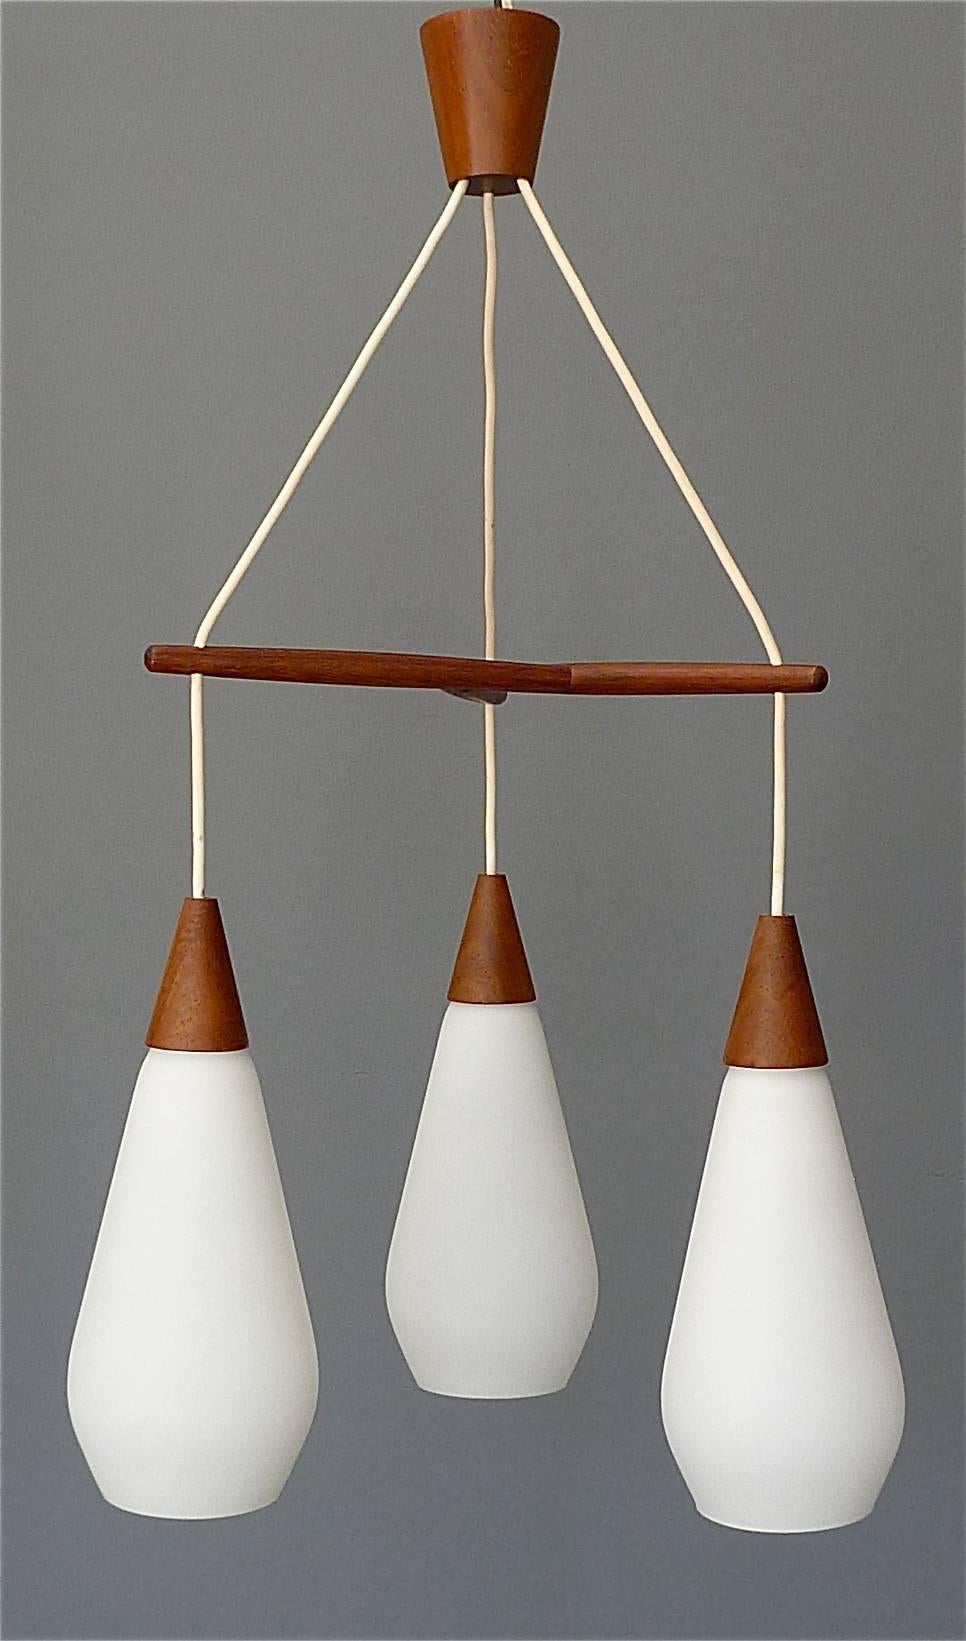 Fantastic sculptural Midcentury Scandinavian modern pendant teak lamp made around 1960 with attribution to Uno & Östen Kristiansson for Luxus / Sweden. The gorgeous light has three opaque white glass shades with satin finish hanging on a teak wood